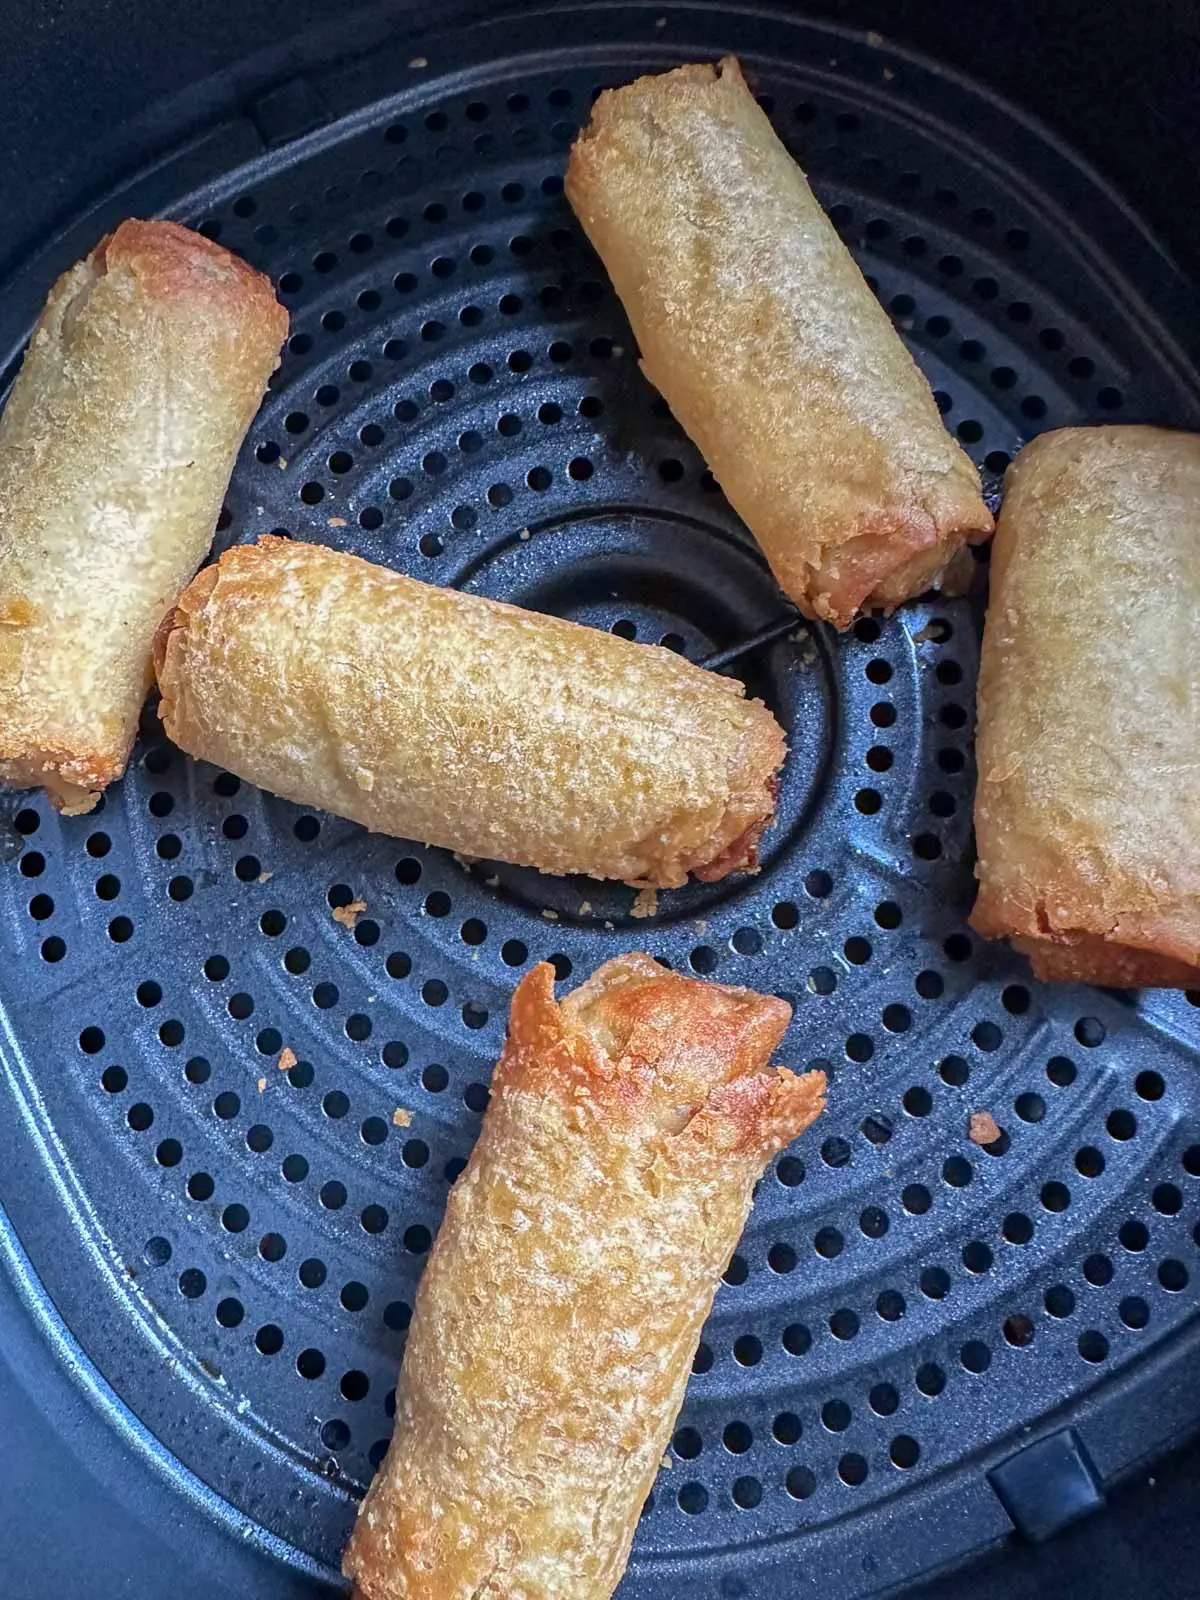 5 cooked egg rolls in an air fryer basket.